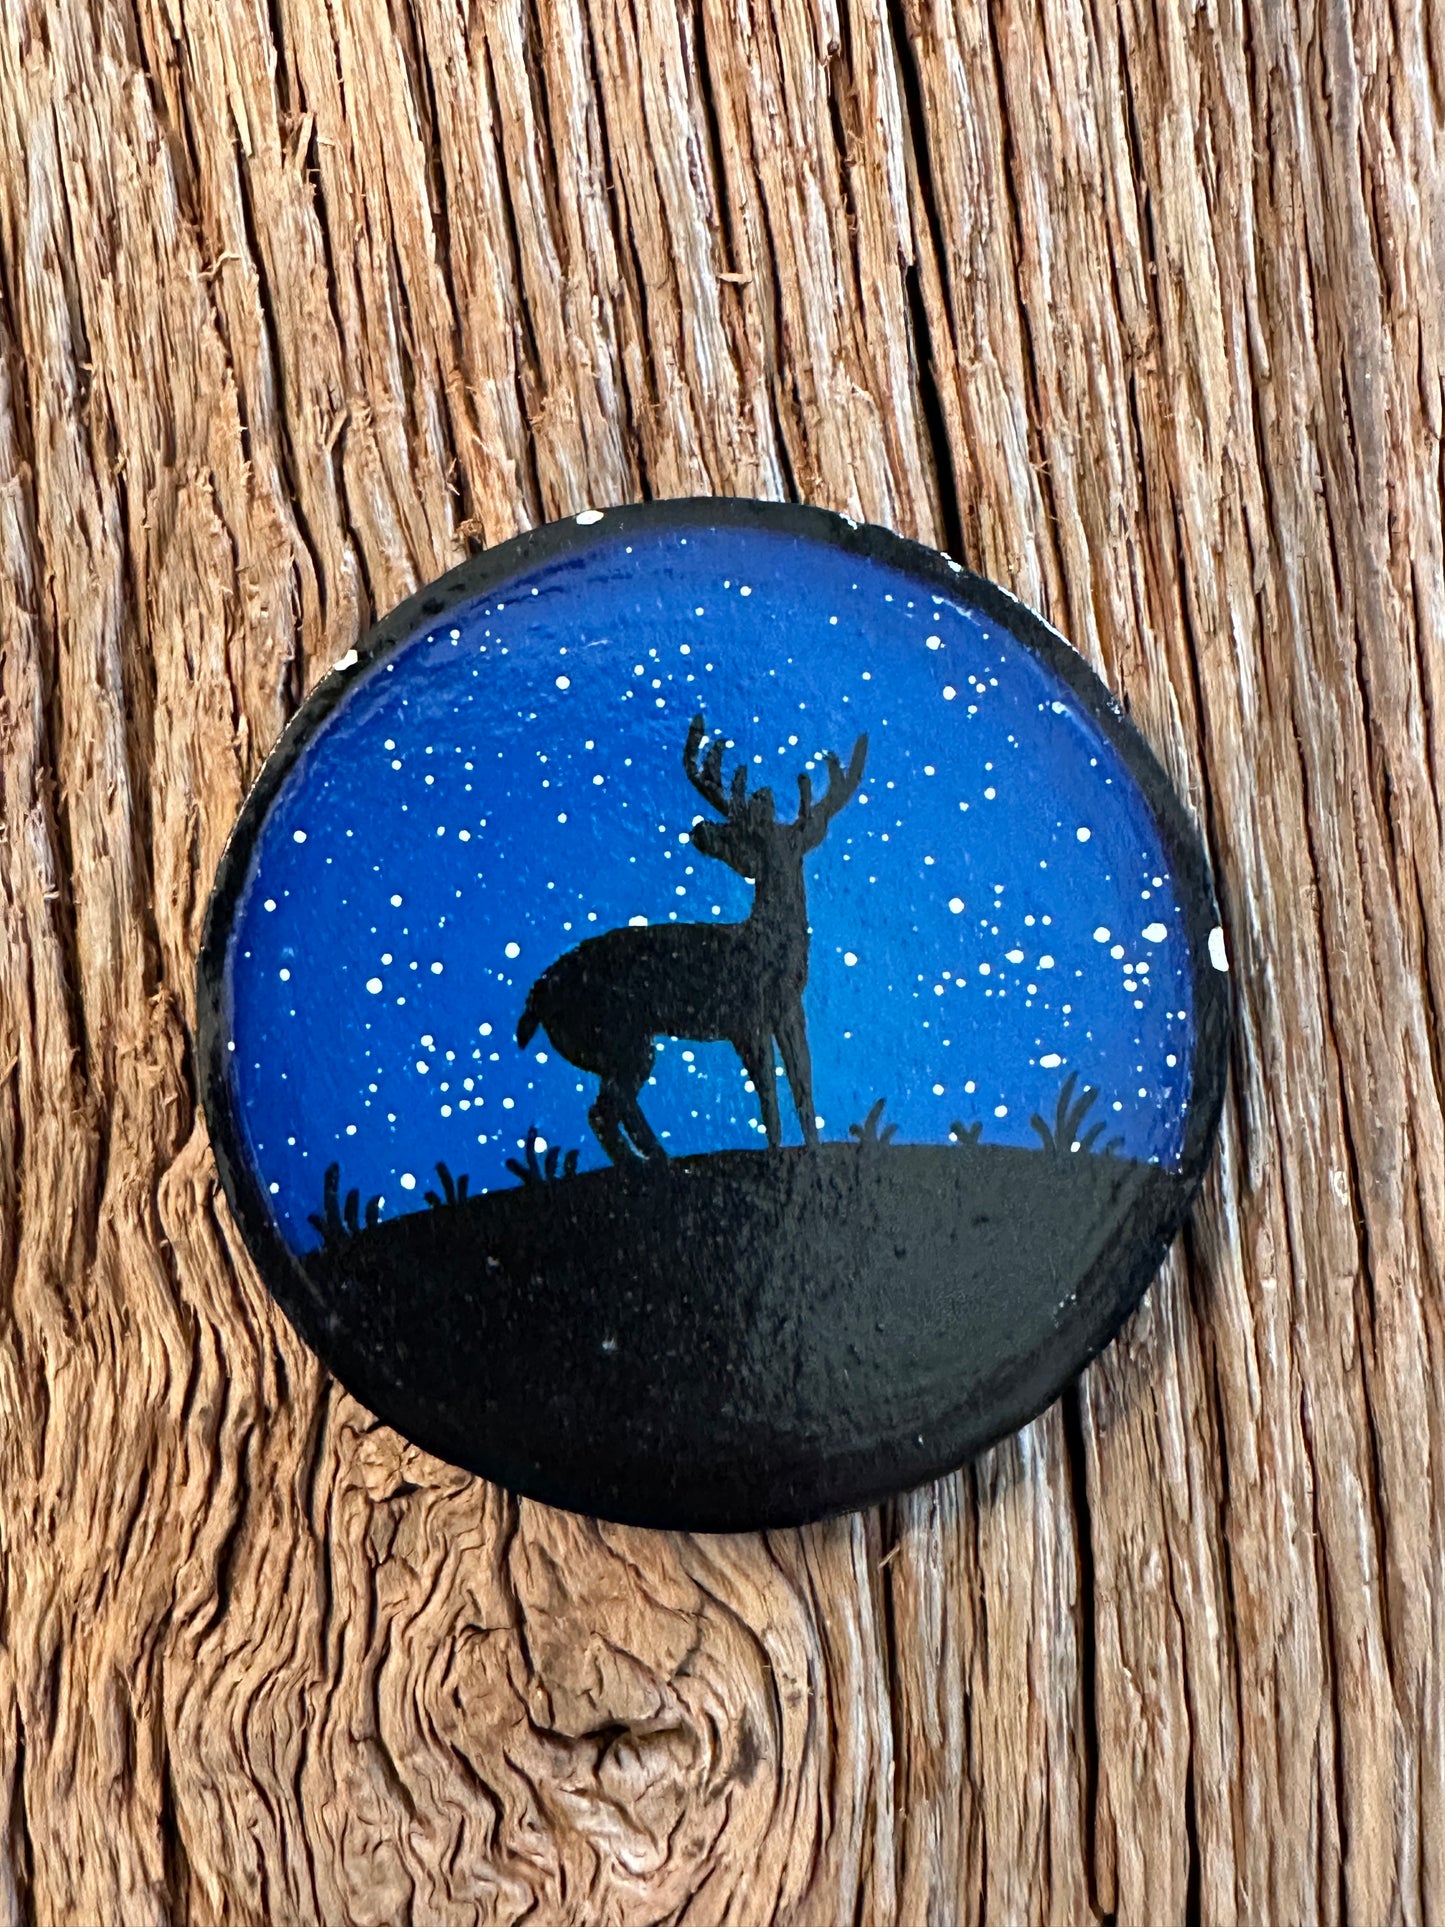 Buck at Night Hand-Painted Magnet by Audrey Songer